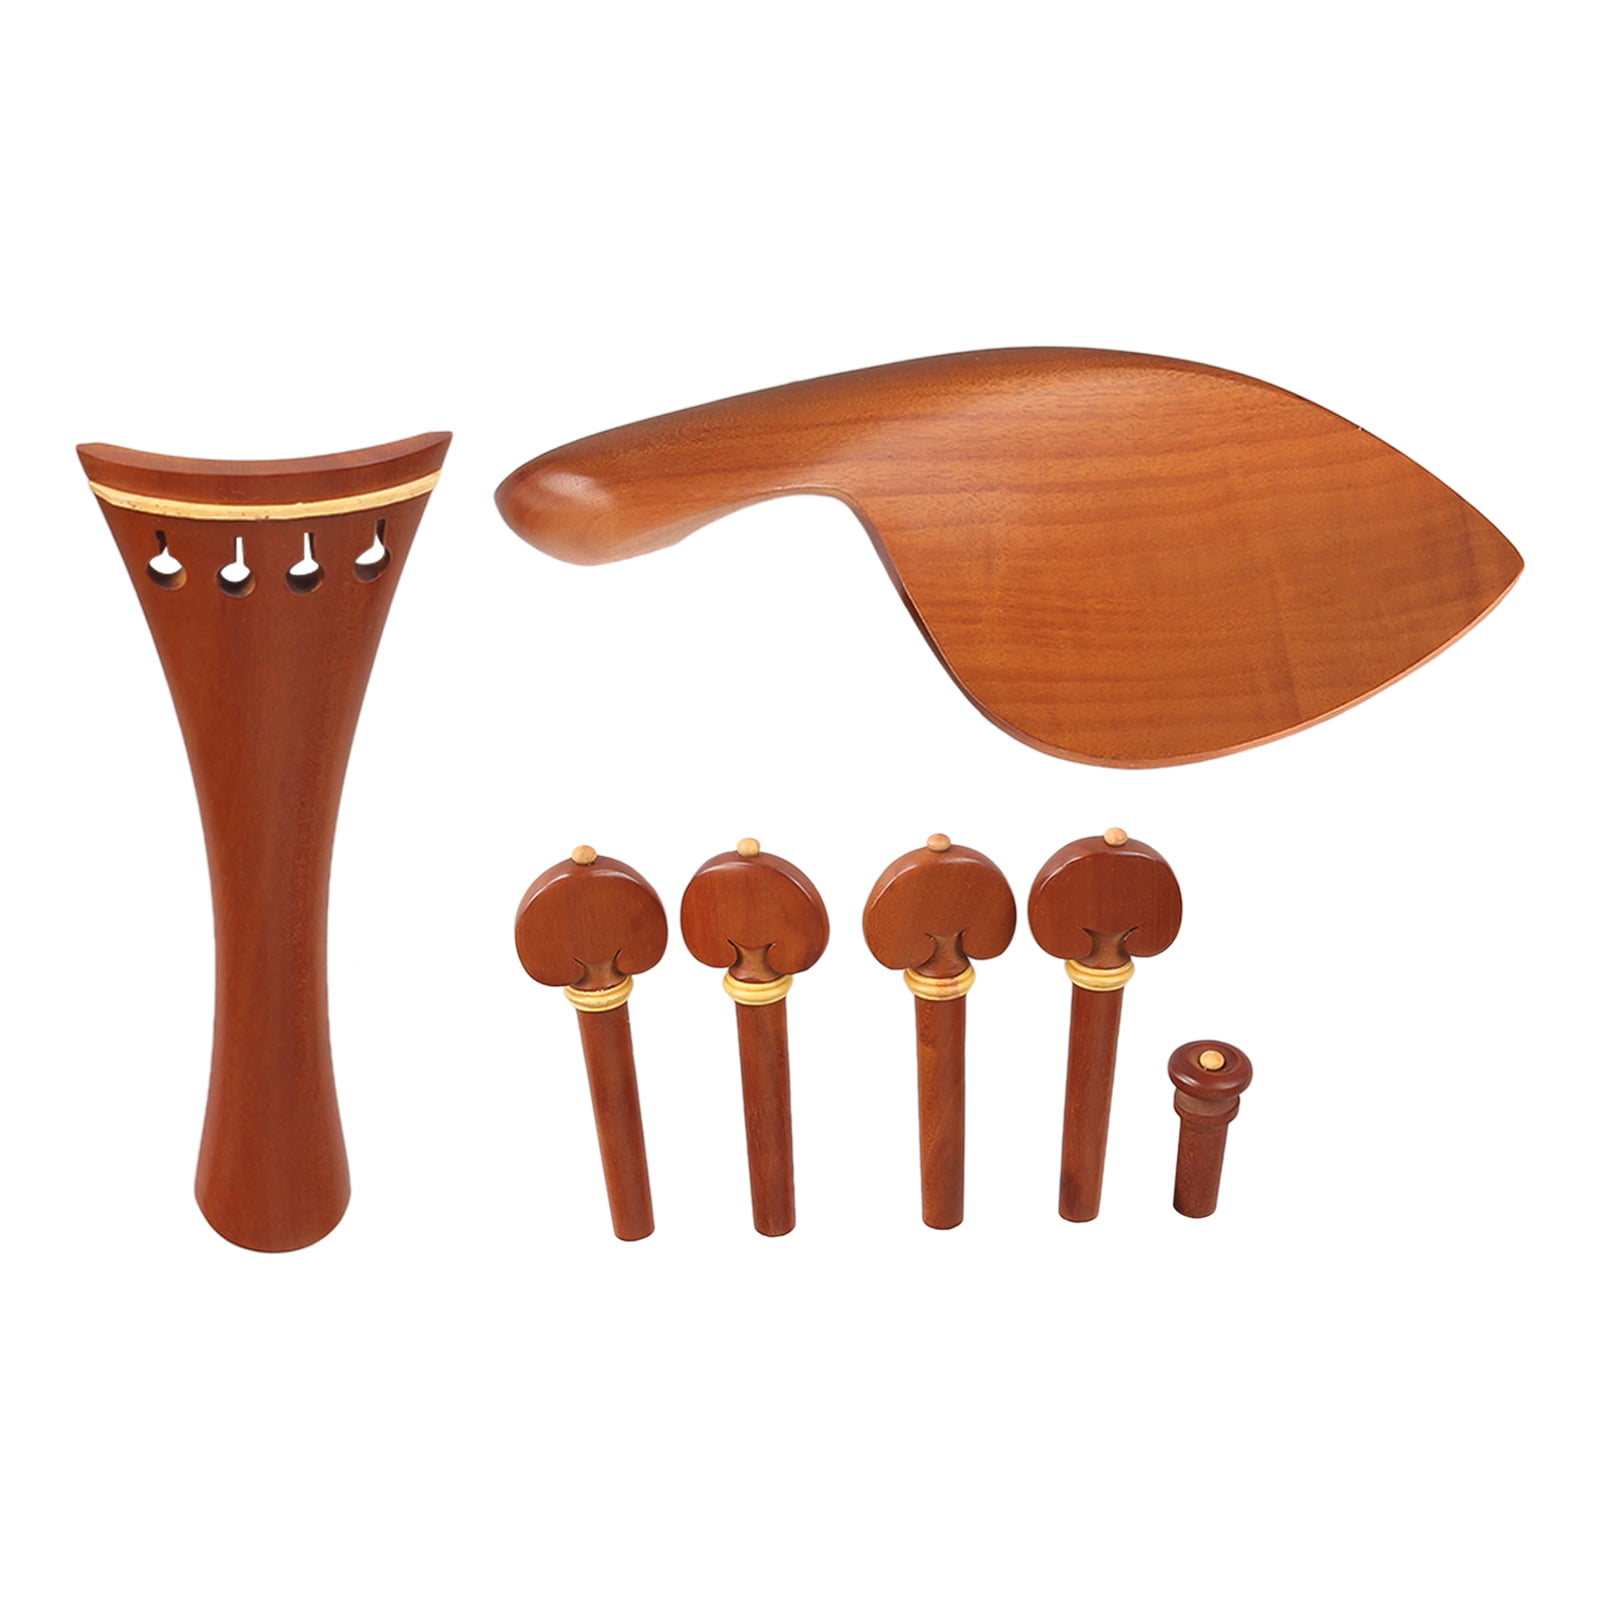 7-Piece Jujube Wood Violin Parts Set Includes 1 Tailpiece 4 Tuning Pegs 1  Chin Rest 1 Endpin Accessories for 4/4 Violin - Walmart.com